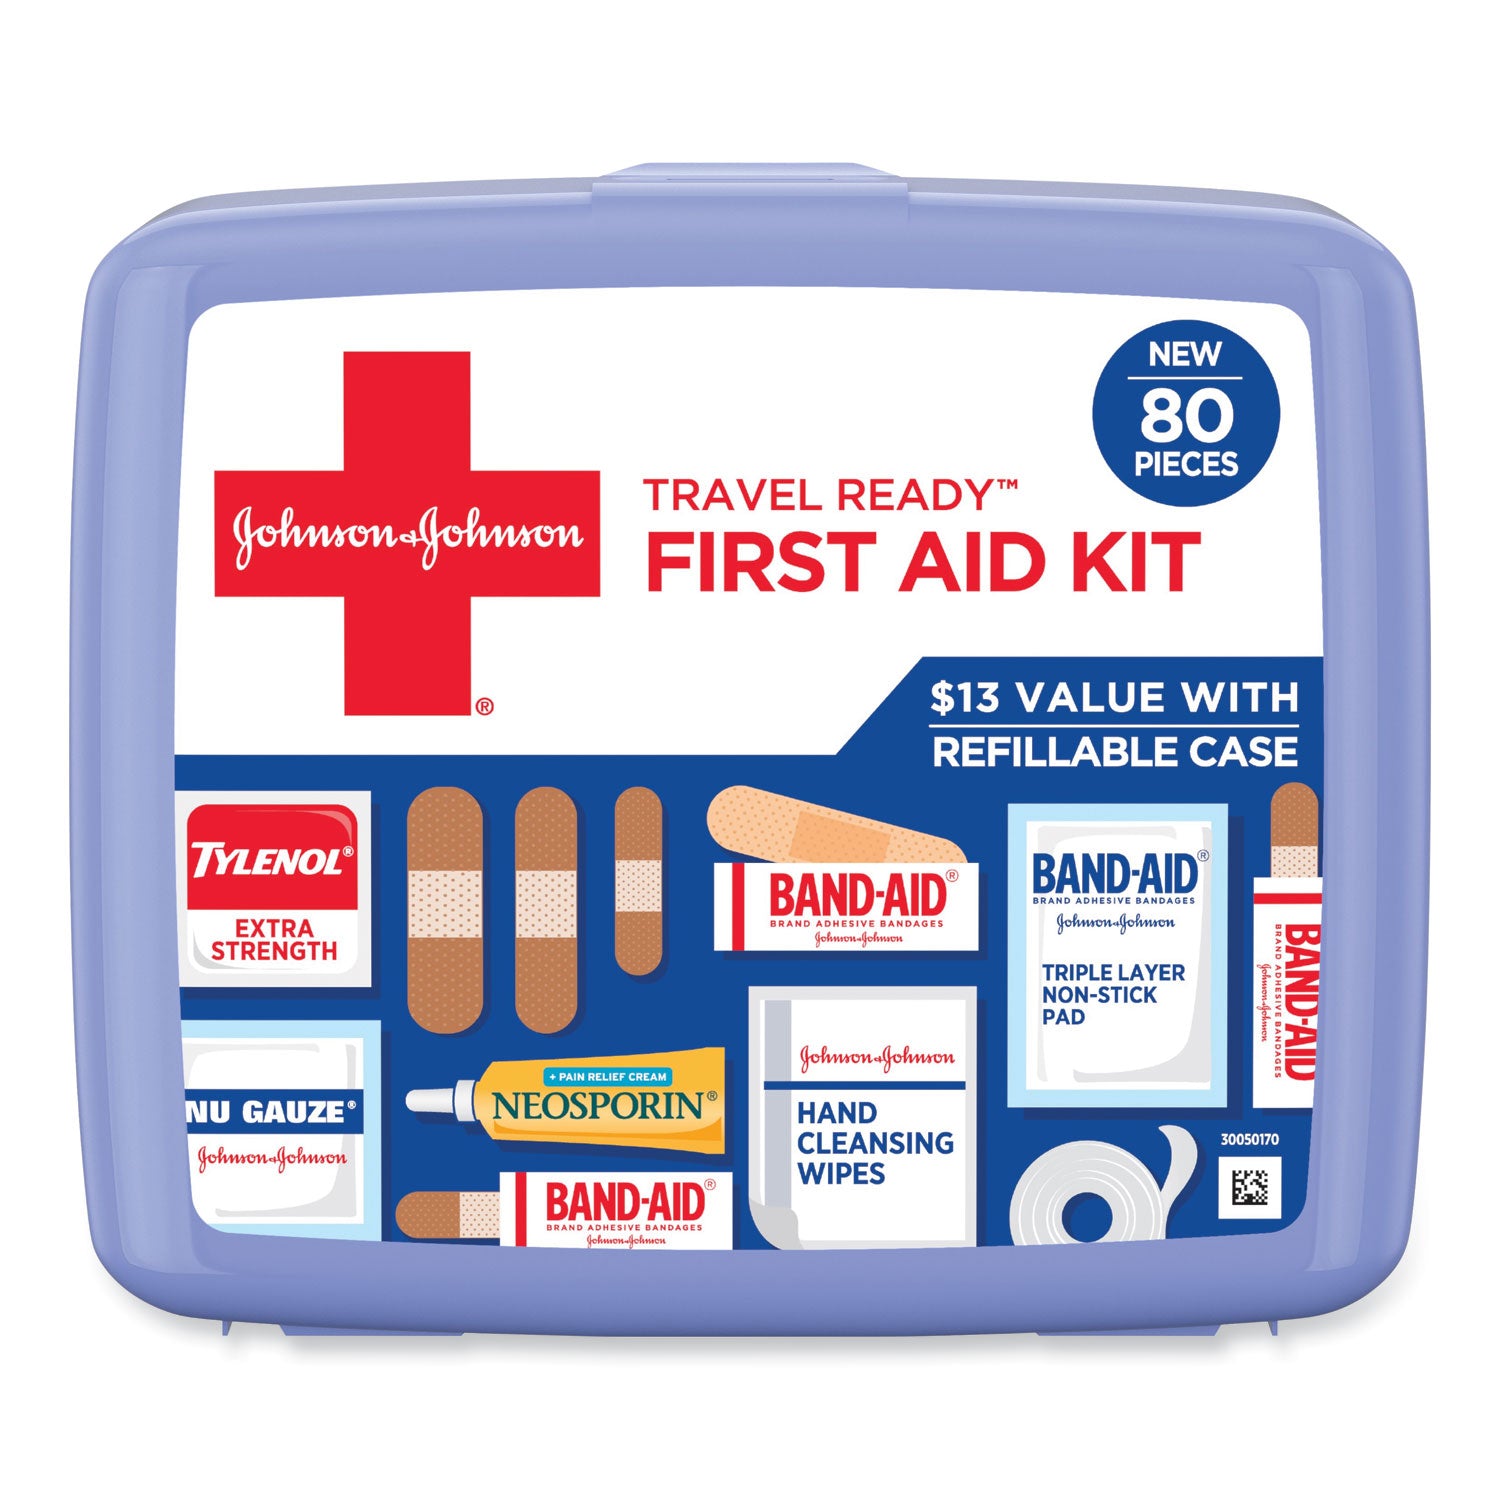 red-cross-travel-ready-portable-emergency-first-aid-kit-80-pieces-plastic-case_joj202068 - 1